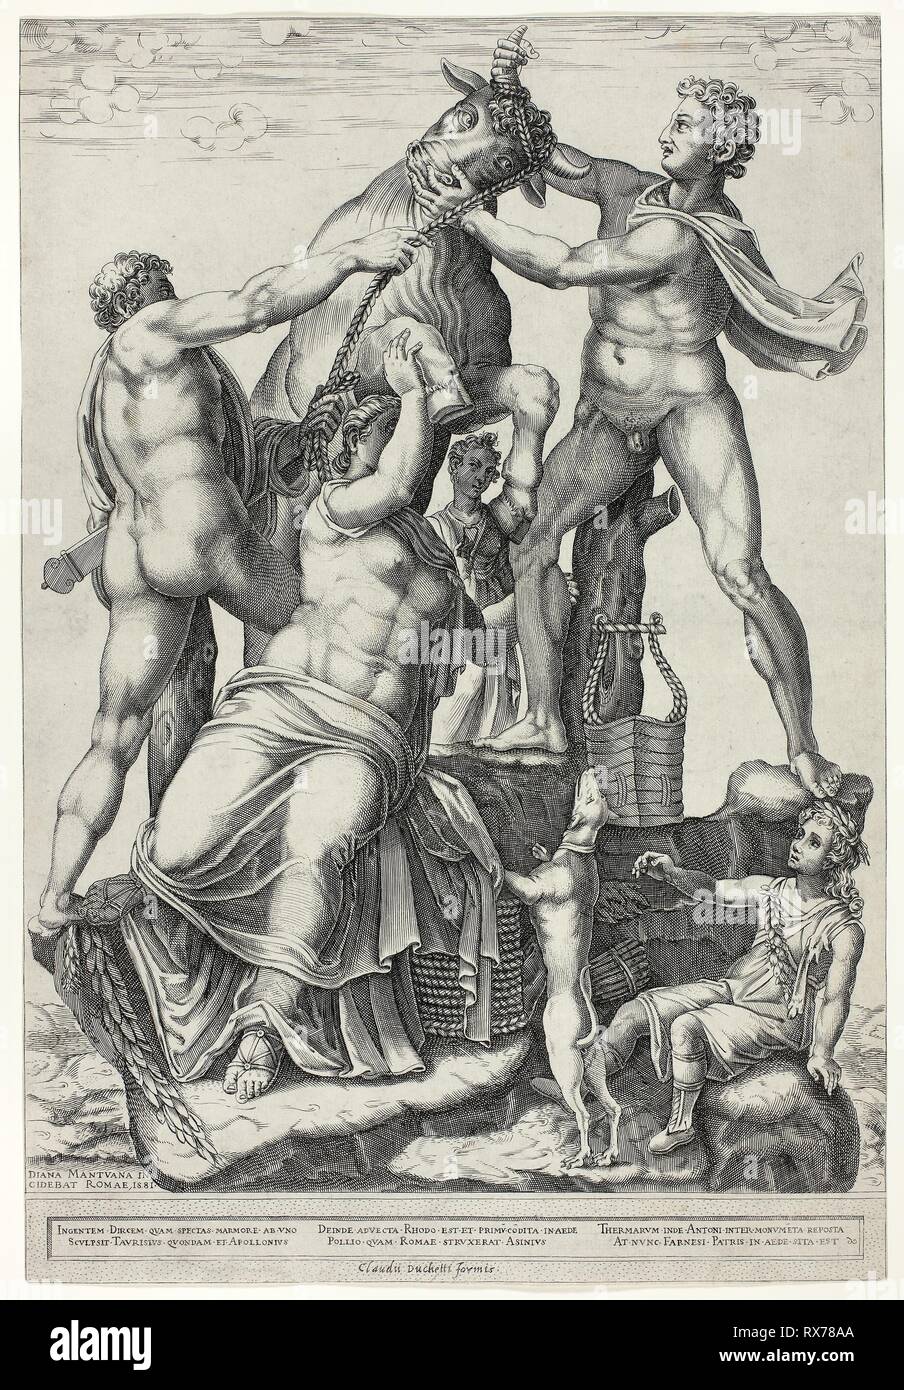 The Farnese Bull with Dirce, Zethus and Amphion. Diana Scultori; Italian, c. 1536-c. 1590. Date: 1581. Dimensions: 369 x 272 mm (image); 398 x 272 (sheet, timed within plate mark). Engraving in black on ivory laid paper. Origin: Italy. Museum: The Chicago Art Institute. Stock Photo